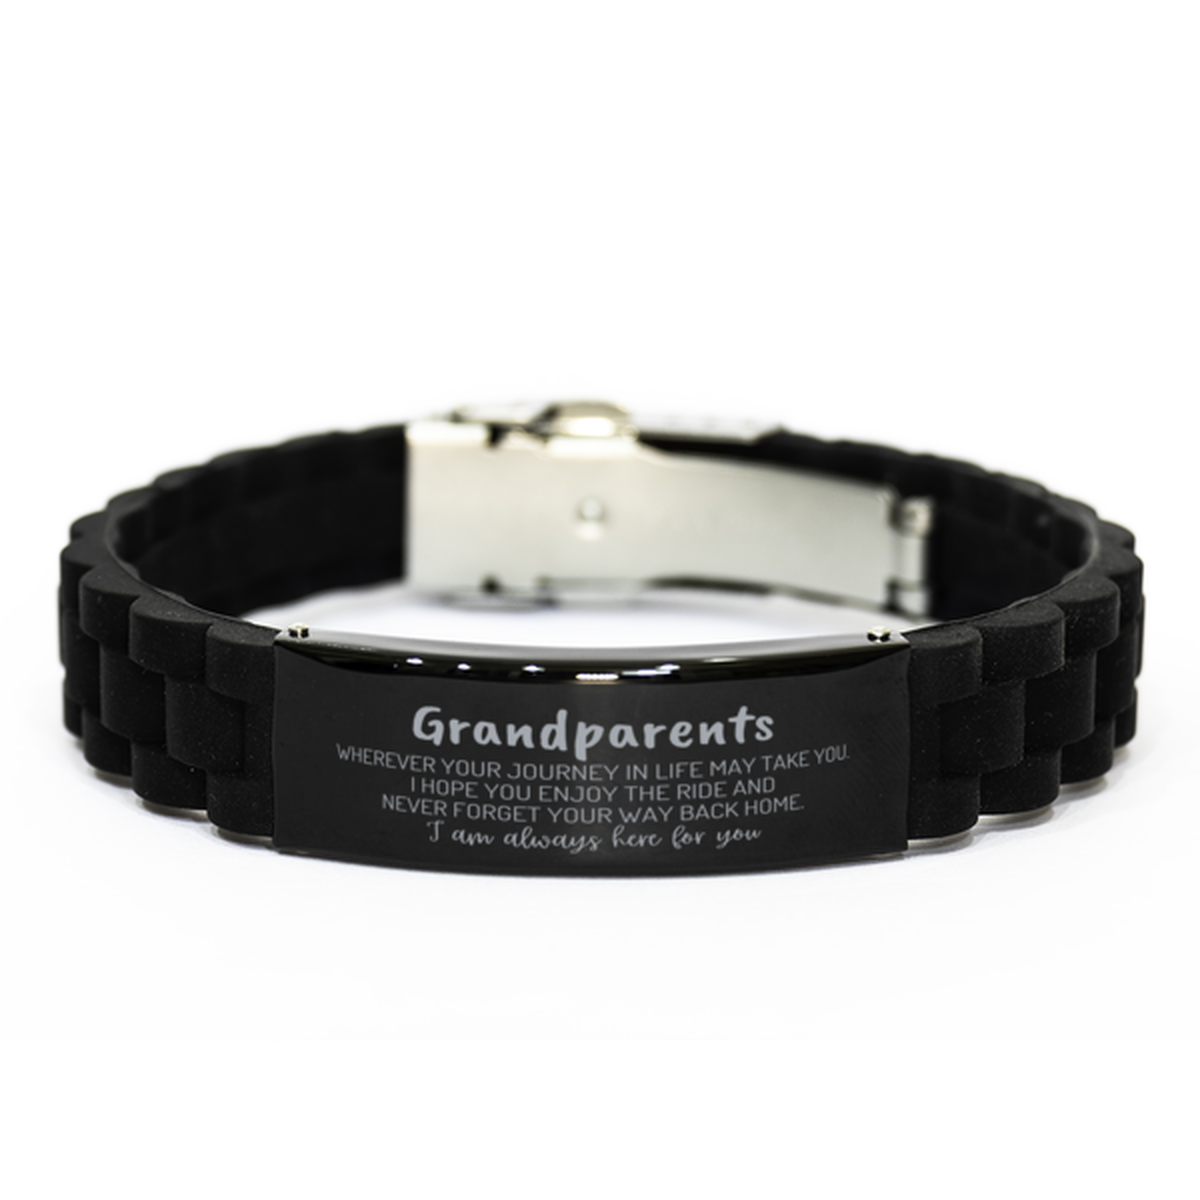 Grandparents wherever your journey in life may take you, I am always here for you Grandparents Black Glidelock Clasp Bracelet, Awesome Christmas Gifts For Grandparents, Grandparents Birthday Gifts for Men Women Family Loved One